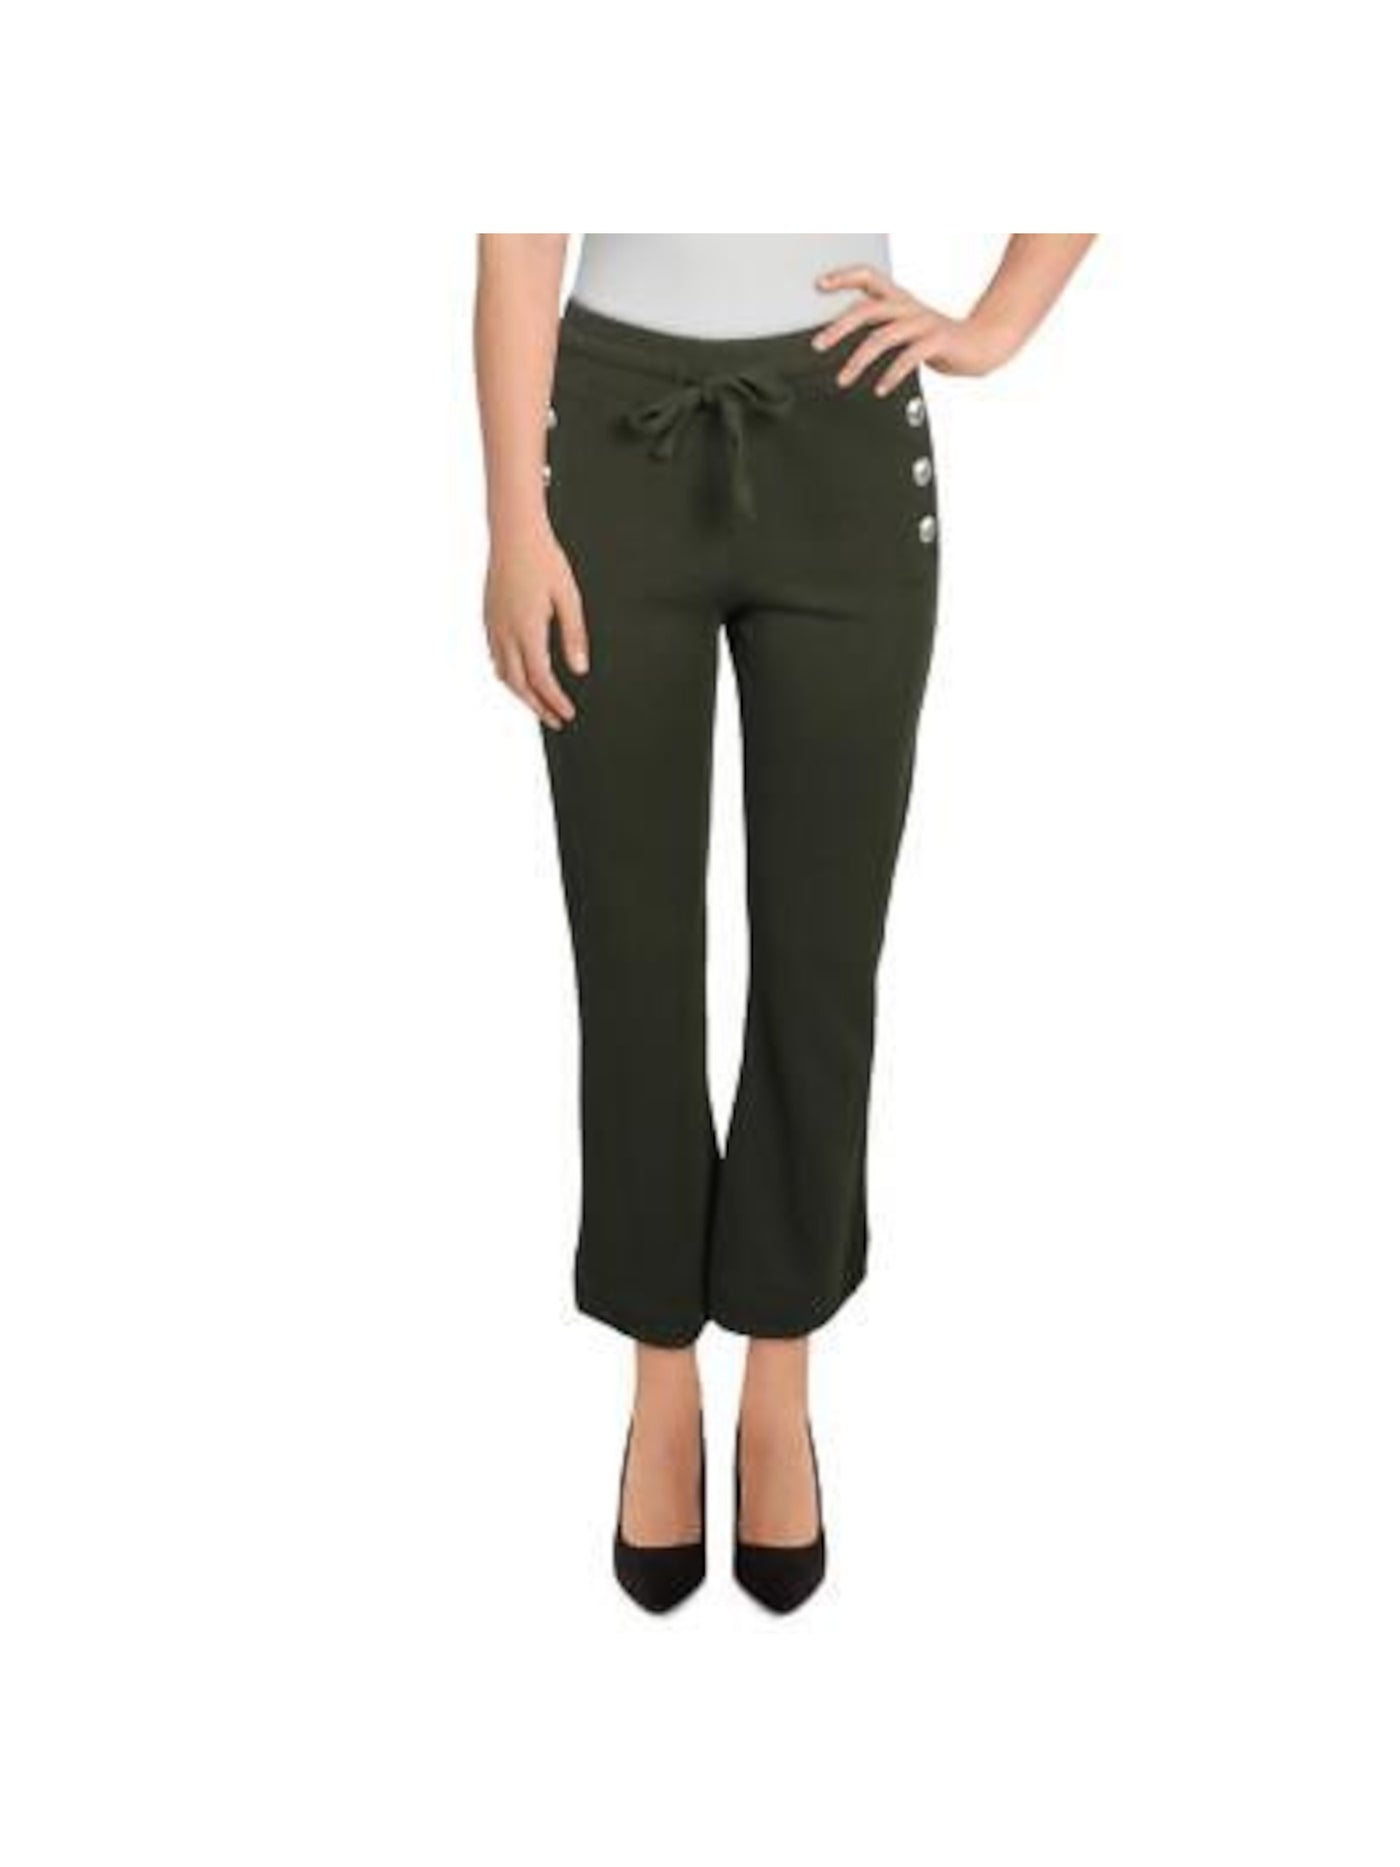 DEREK LAM 10 CROSBY Womens Green Tie Ribbed Button Faux Pockets Cropped Pants M